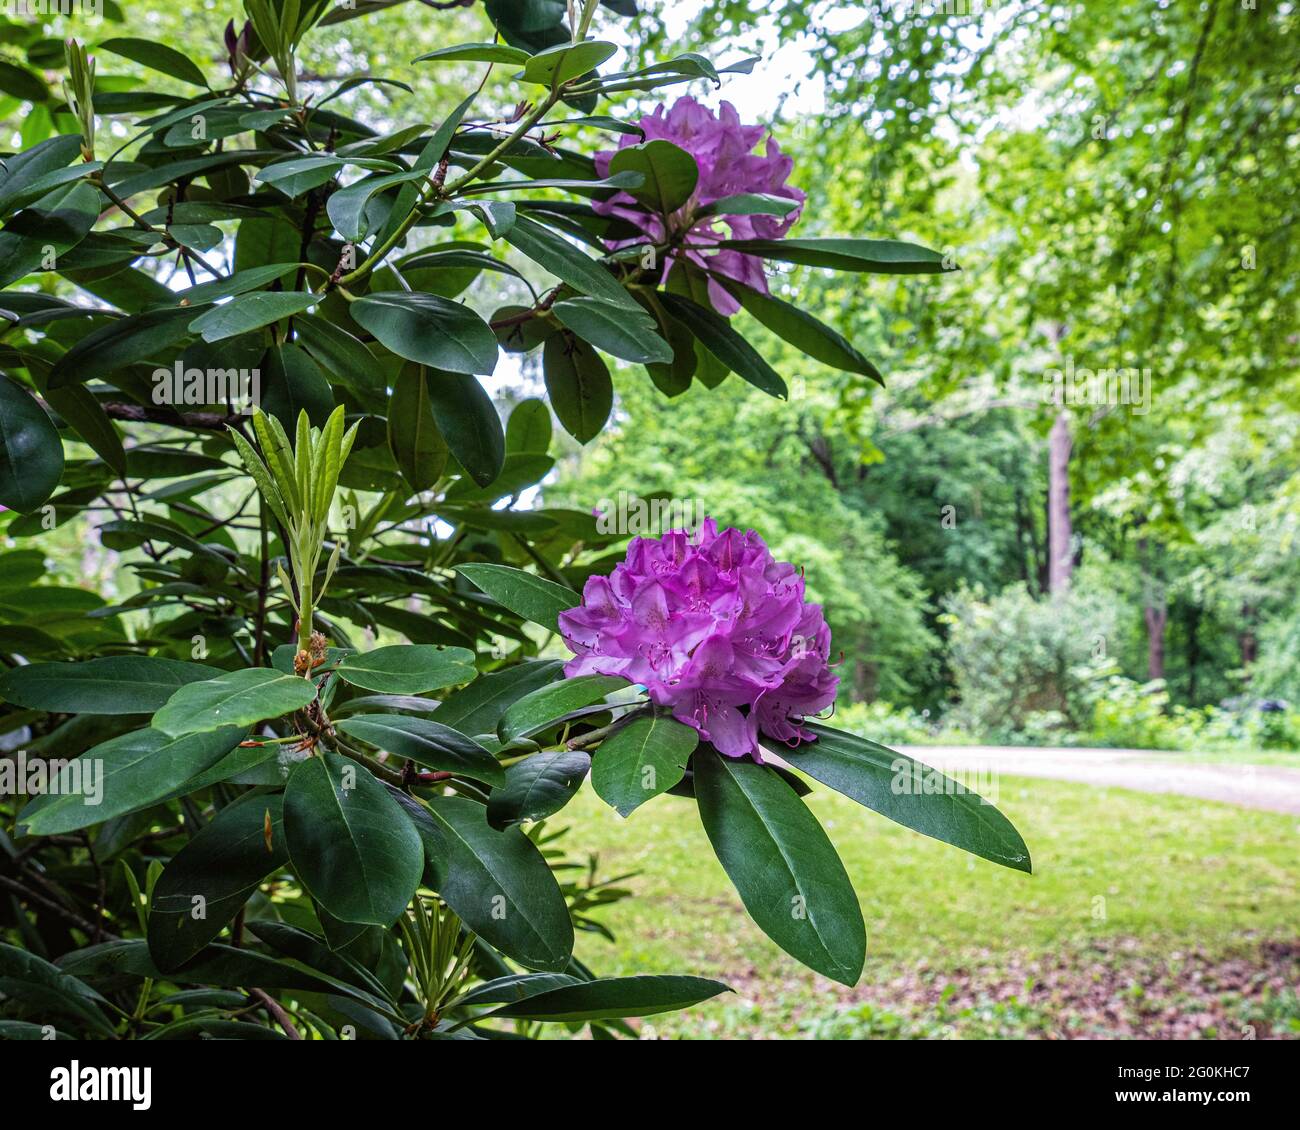 Berlin, Mitte, Tiergarten Public park in Late Spring. Lush foliage and Rhododendron Grove Stock Photo